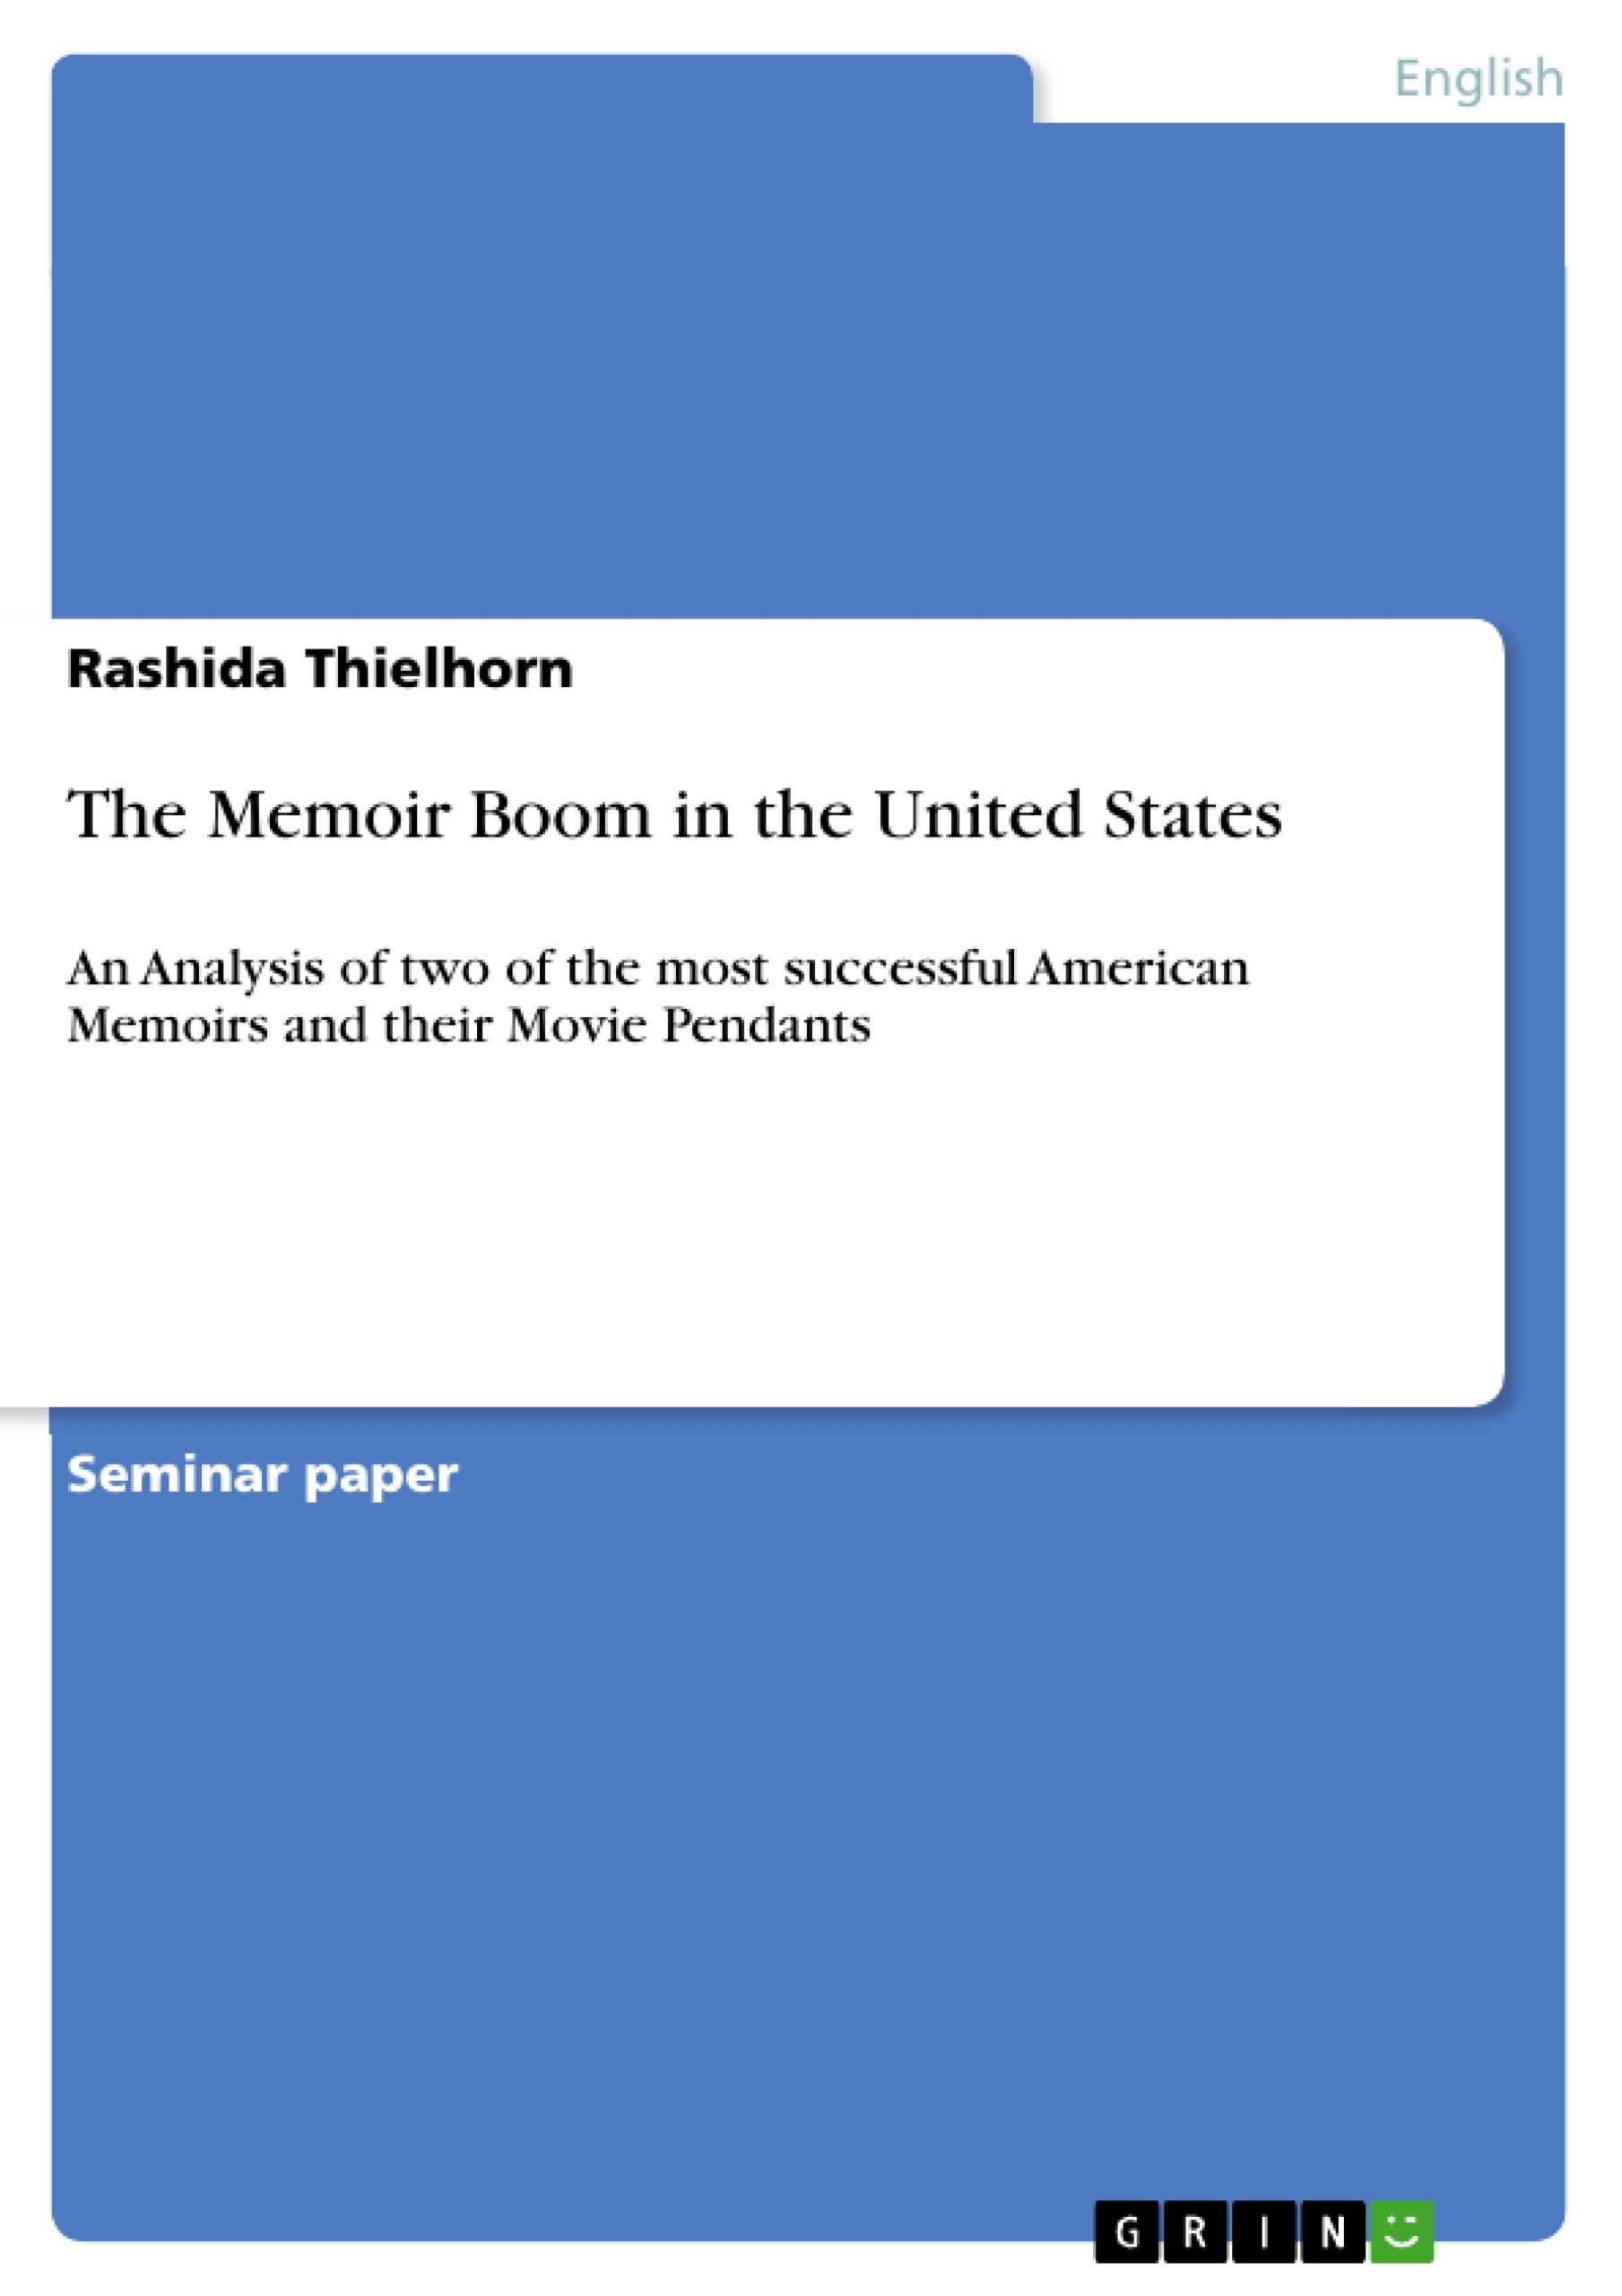 Title: The Memoir Boom in the United States